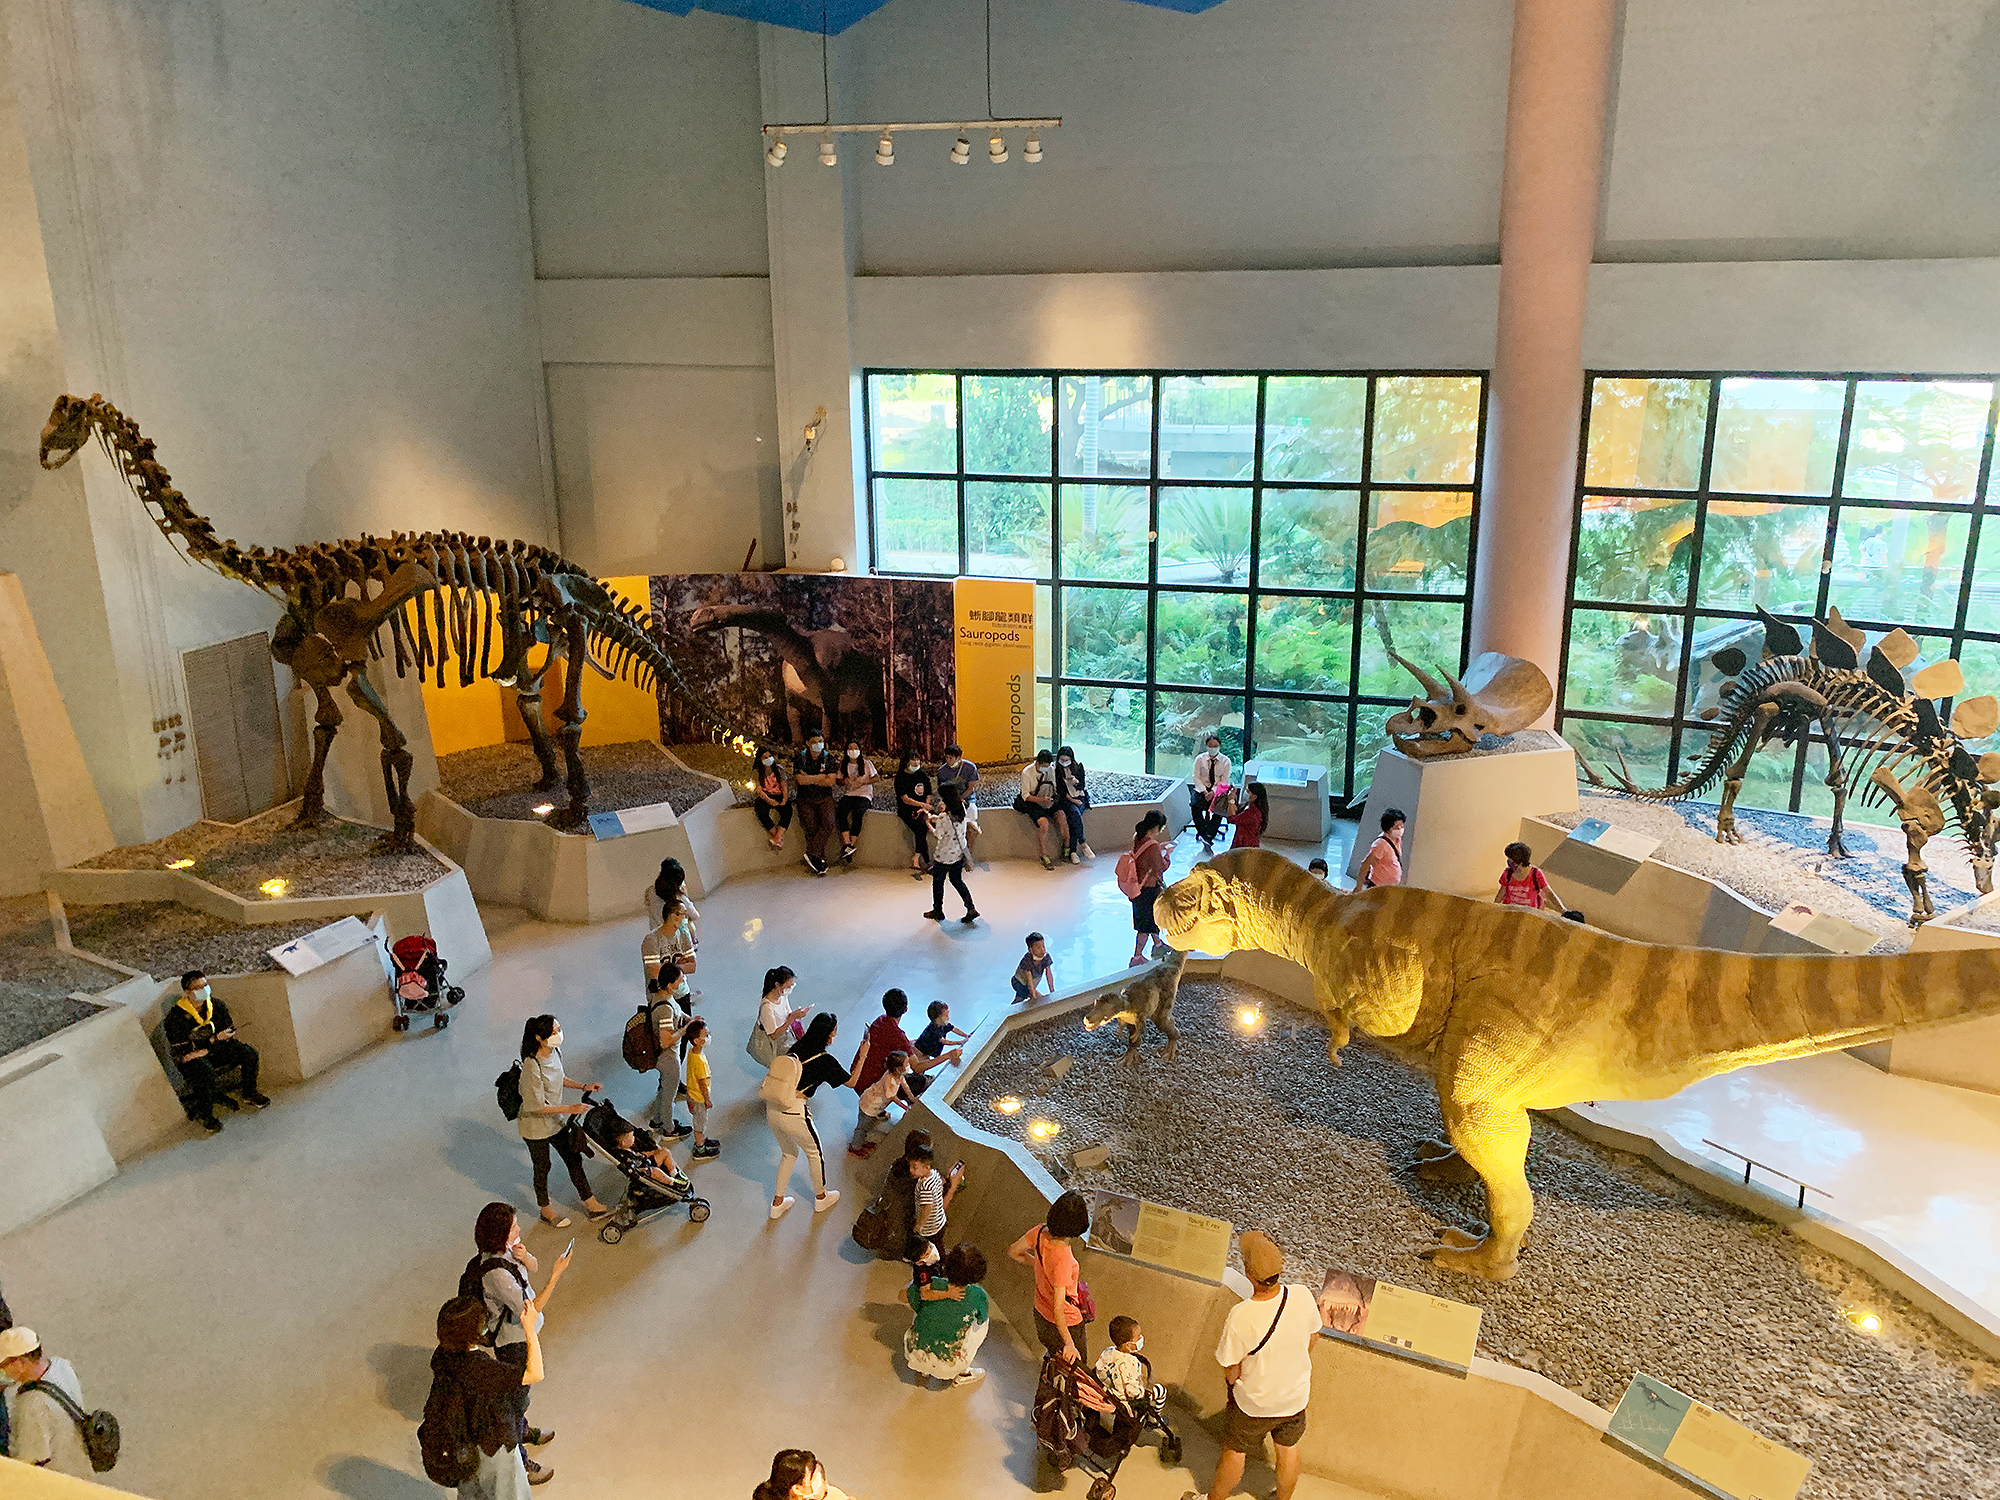 Life Science Hall - The Age of Dinosaurs